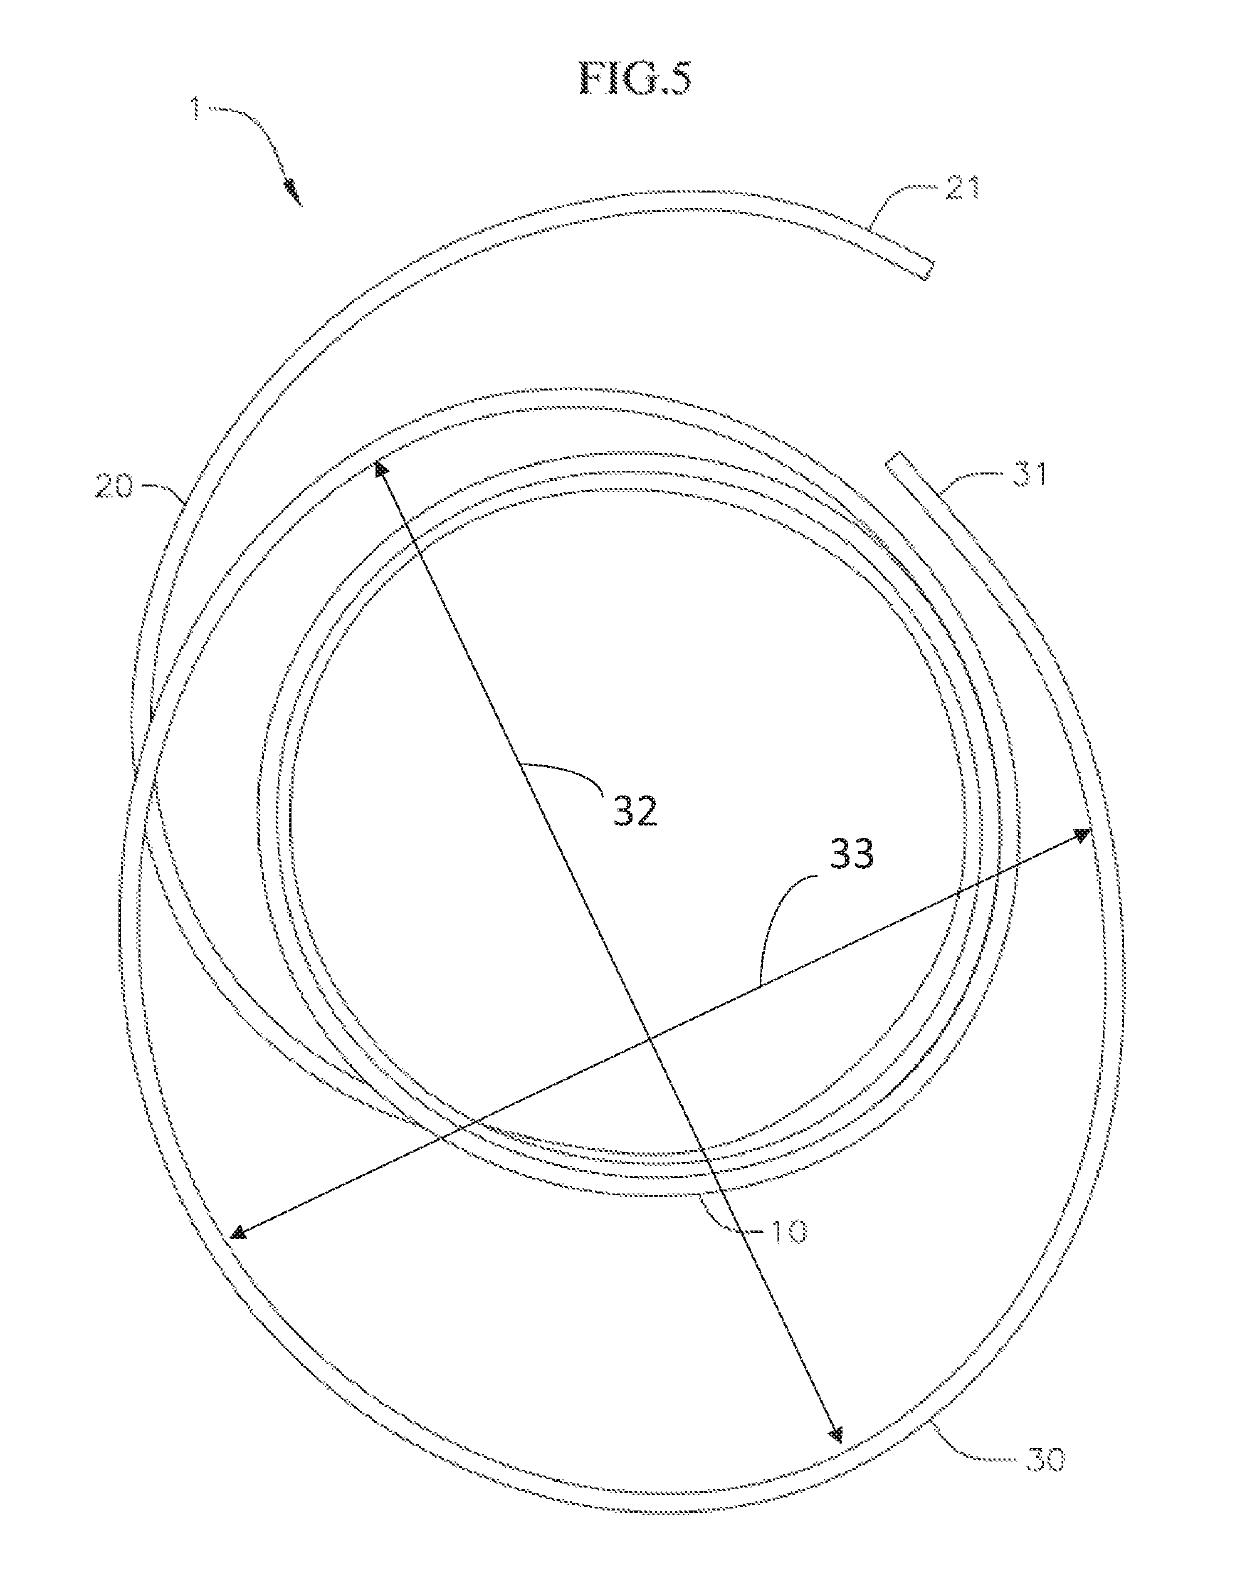 Heart valve docking coils and systems